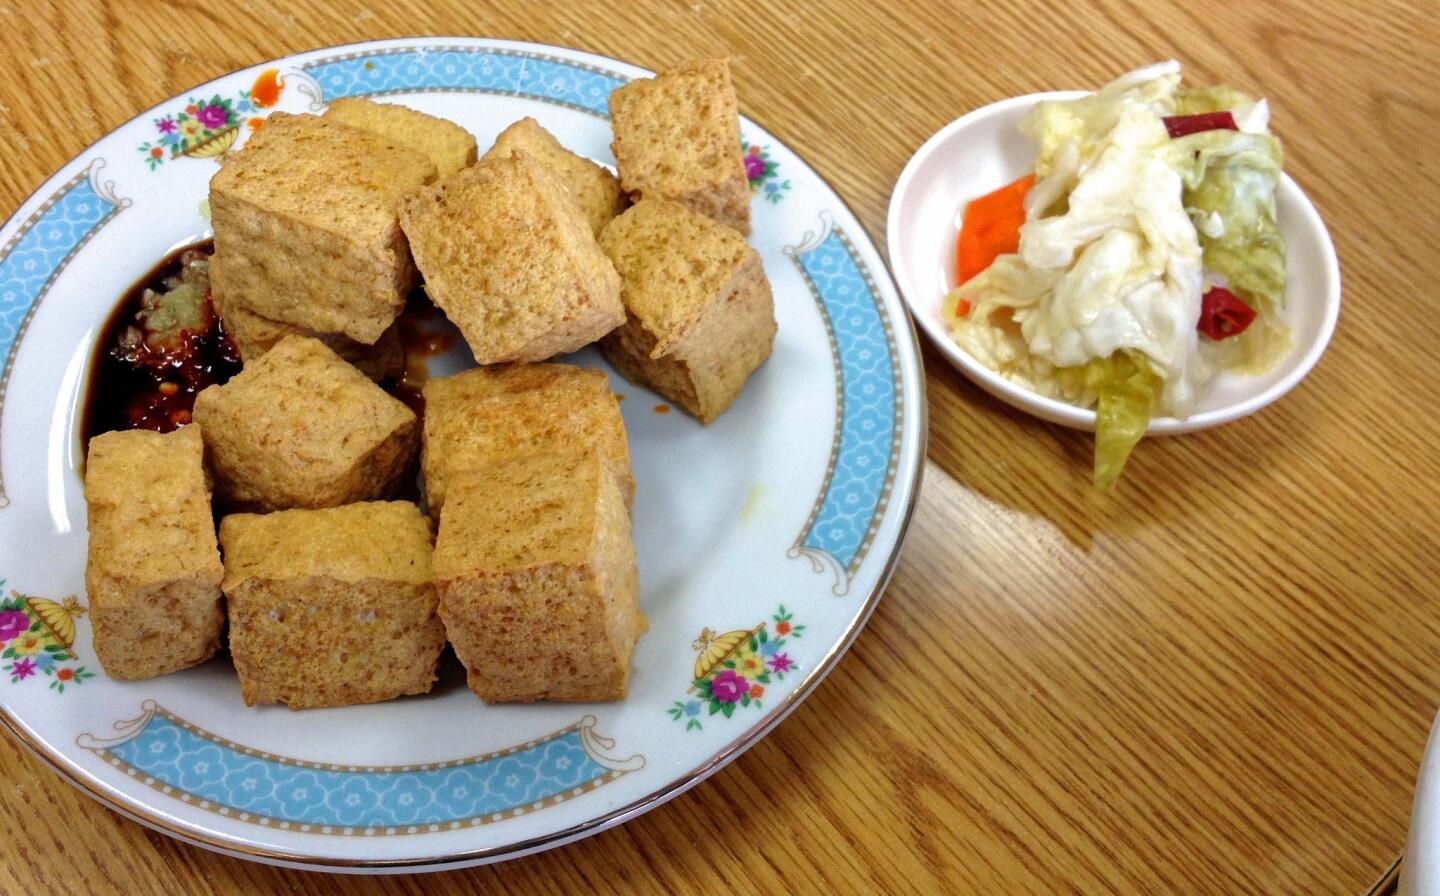 Lee's Garden produces stinky tofu that's crunchier than most varieties.